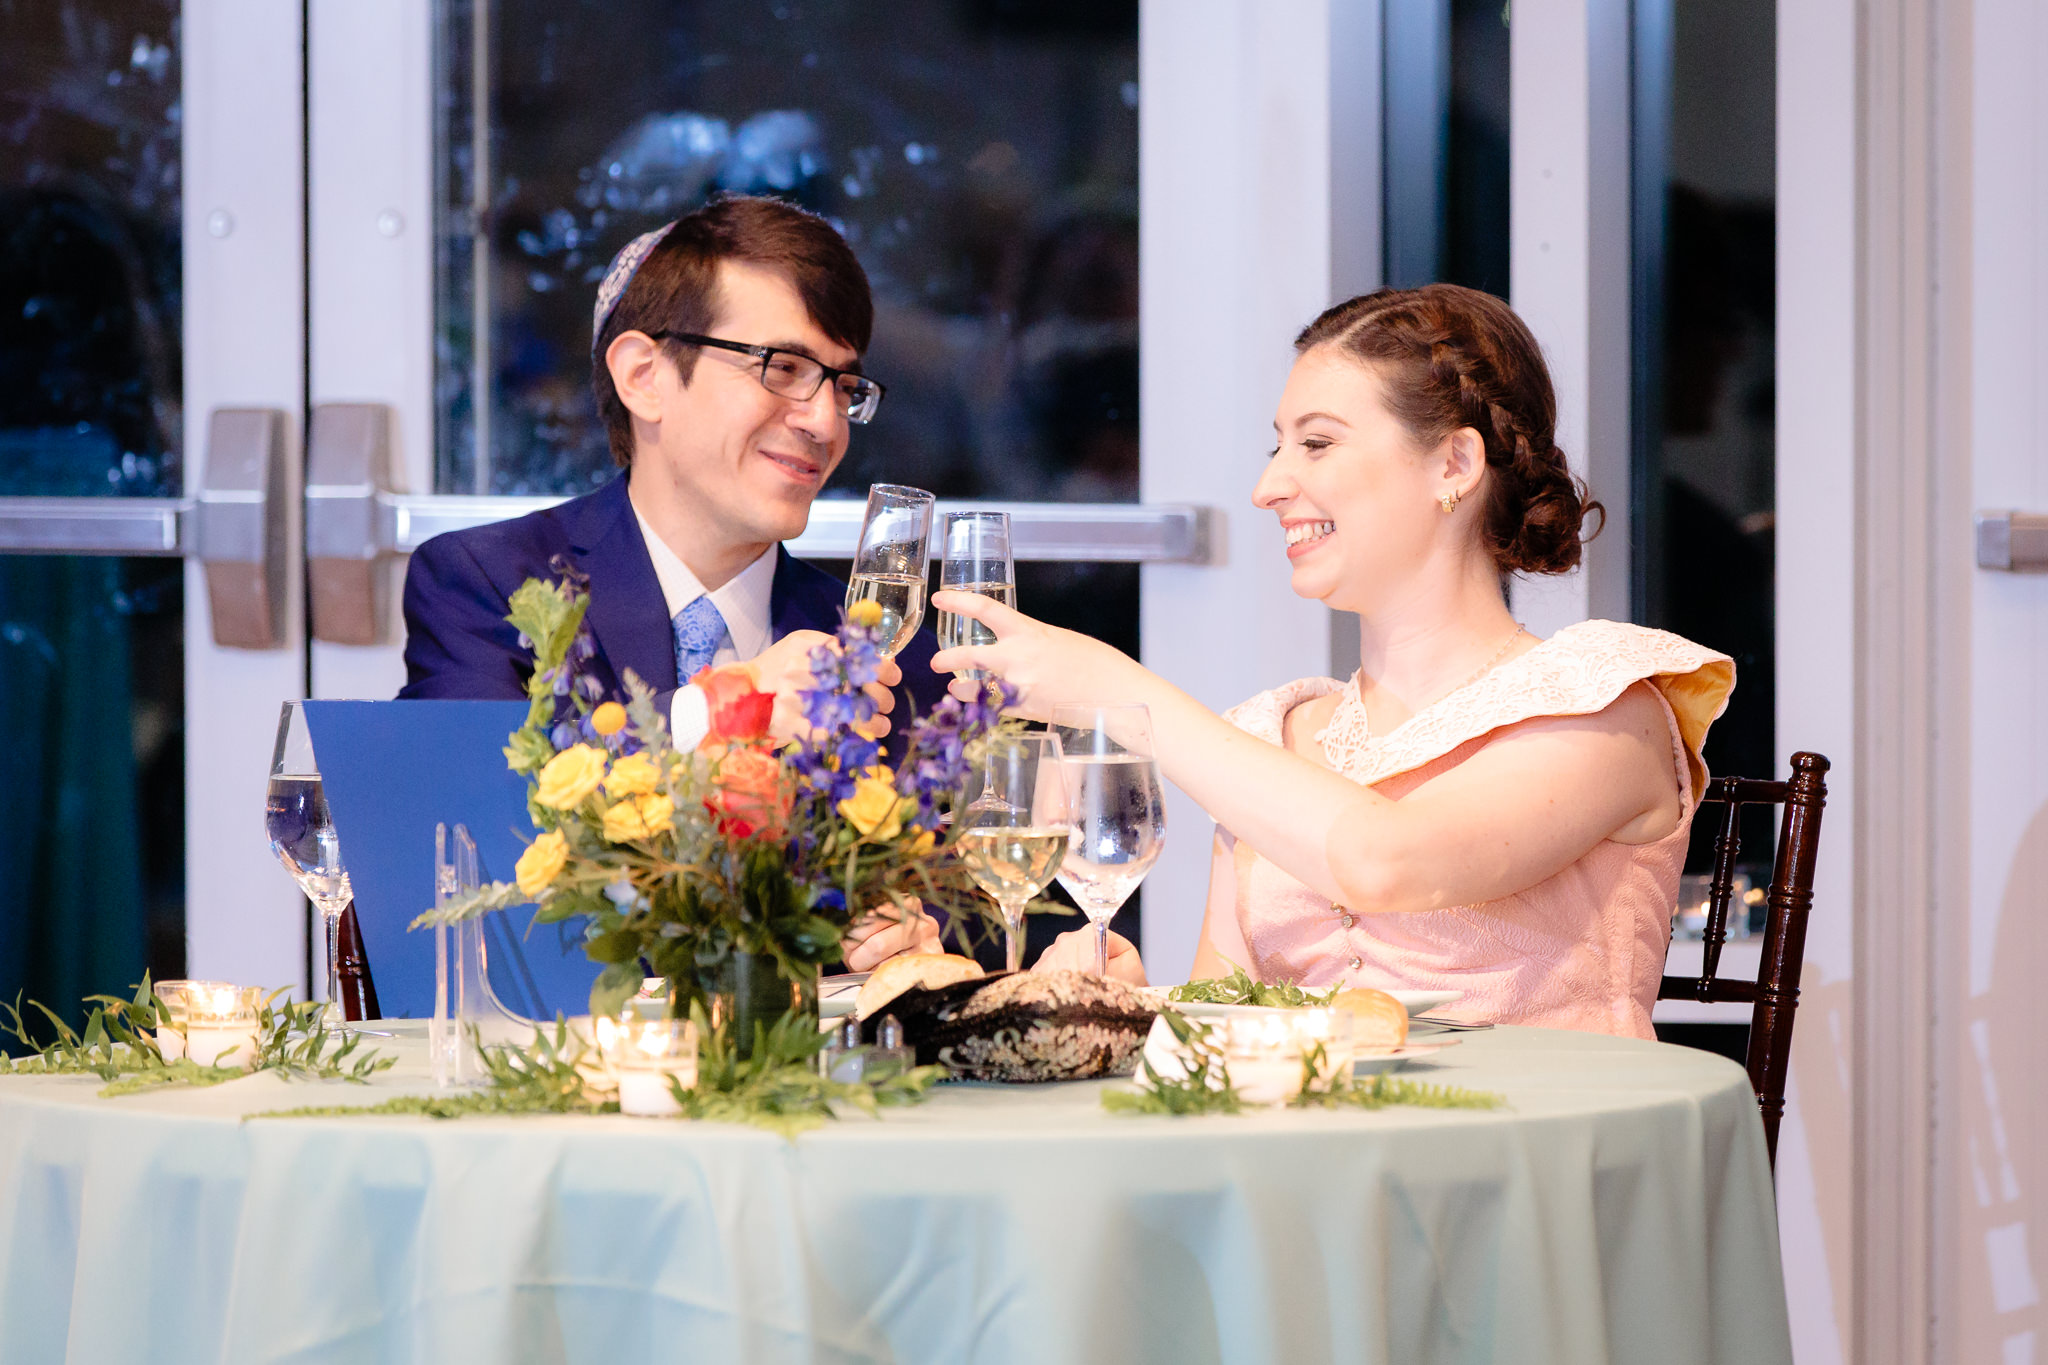 Bride & groom clink glasses during toasts at their Phipps Conservatory wedding reception